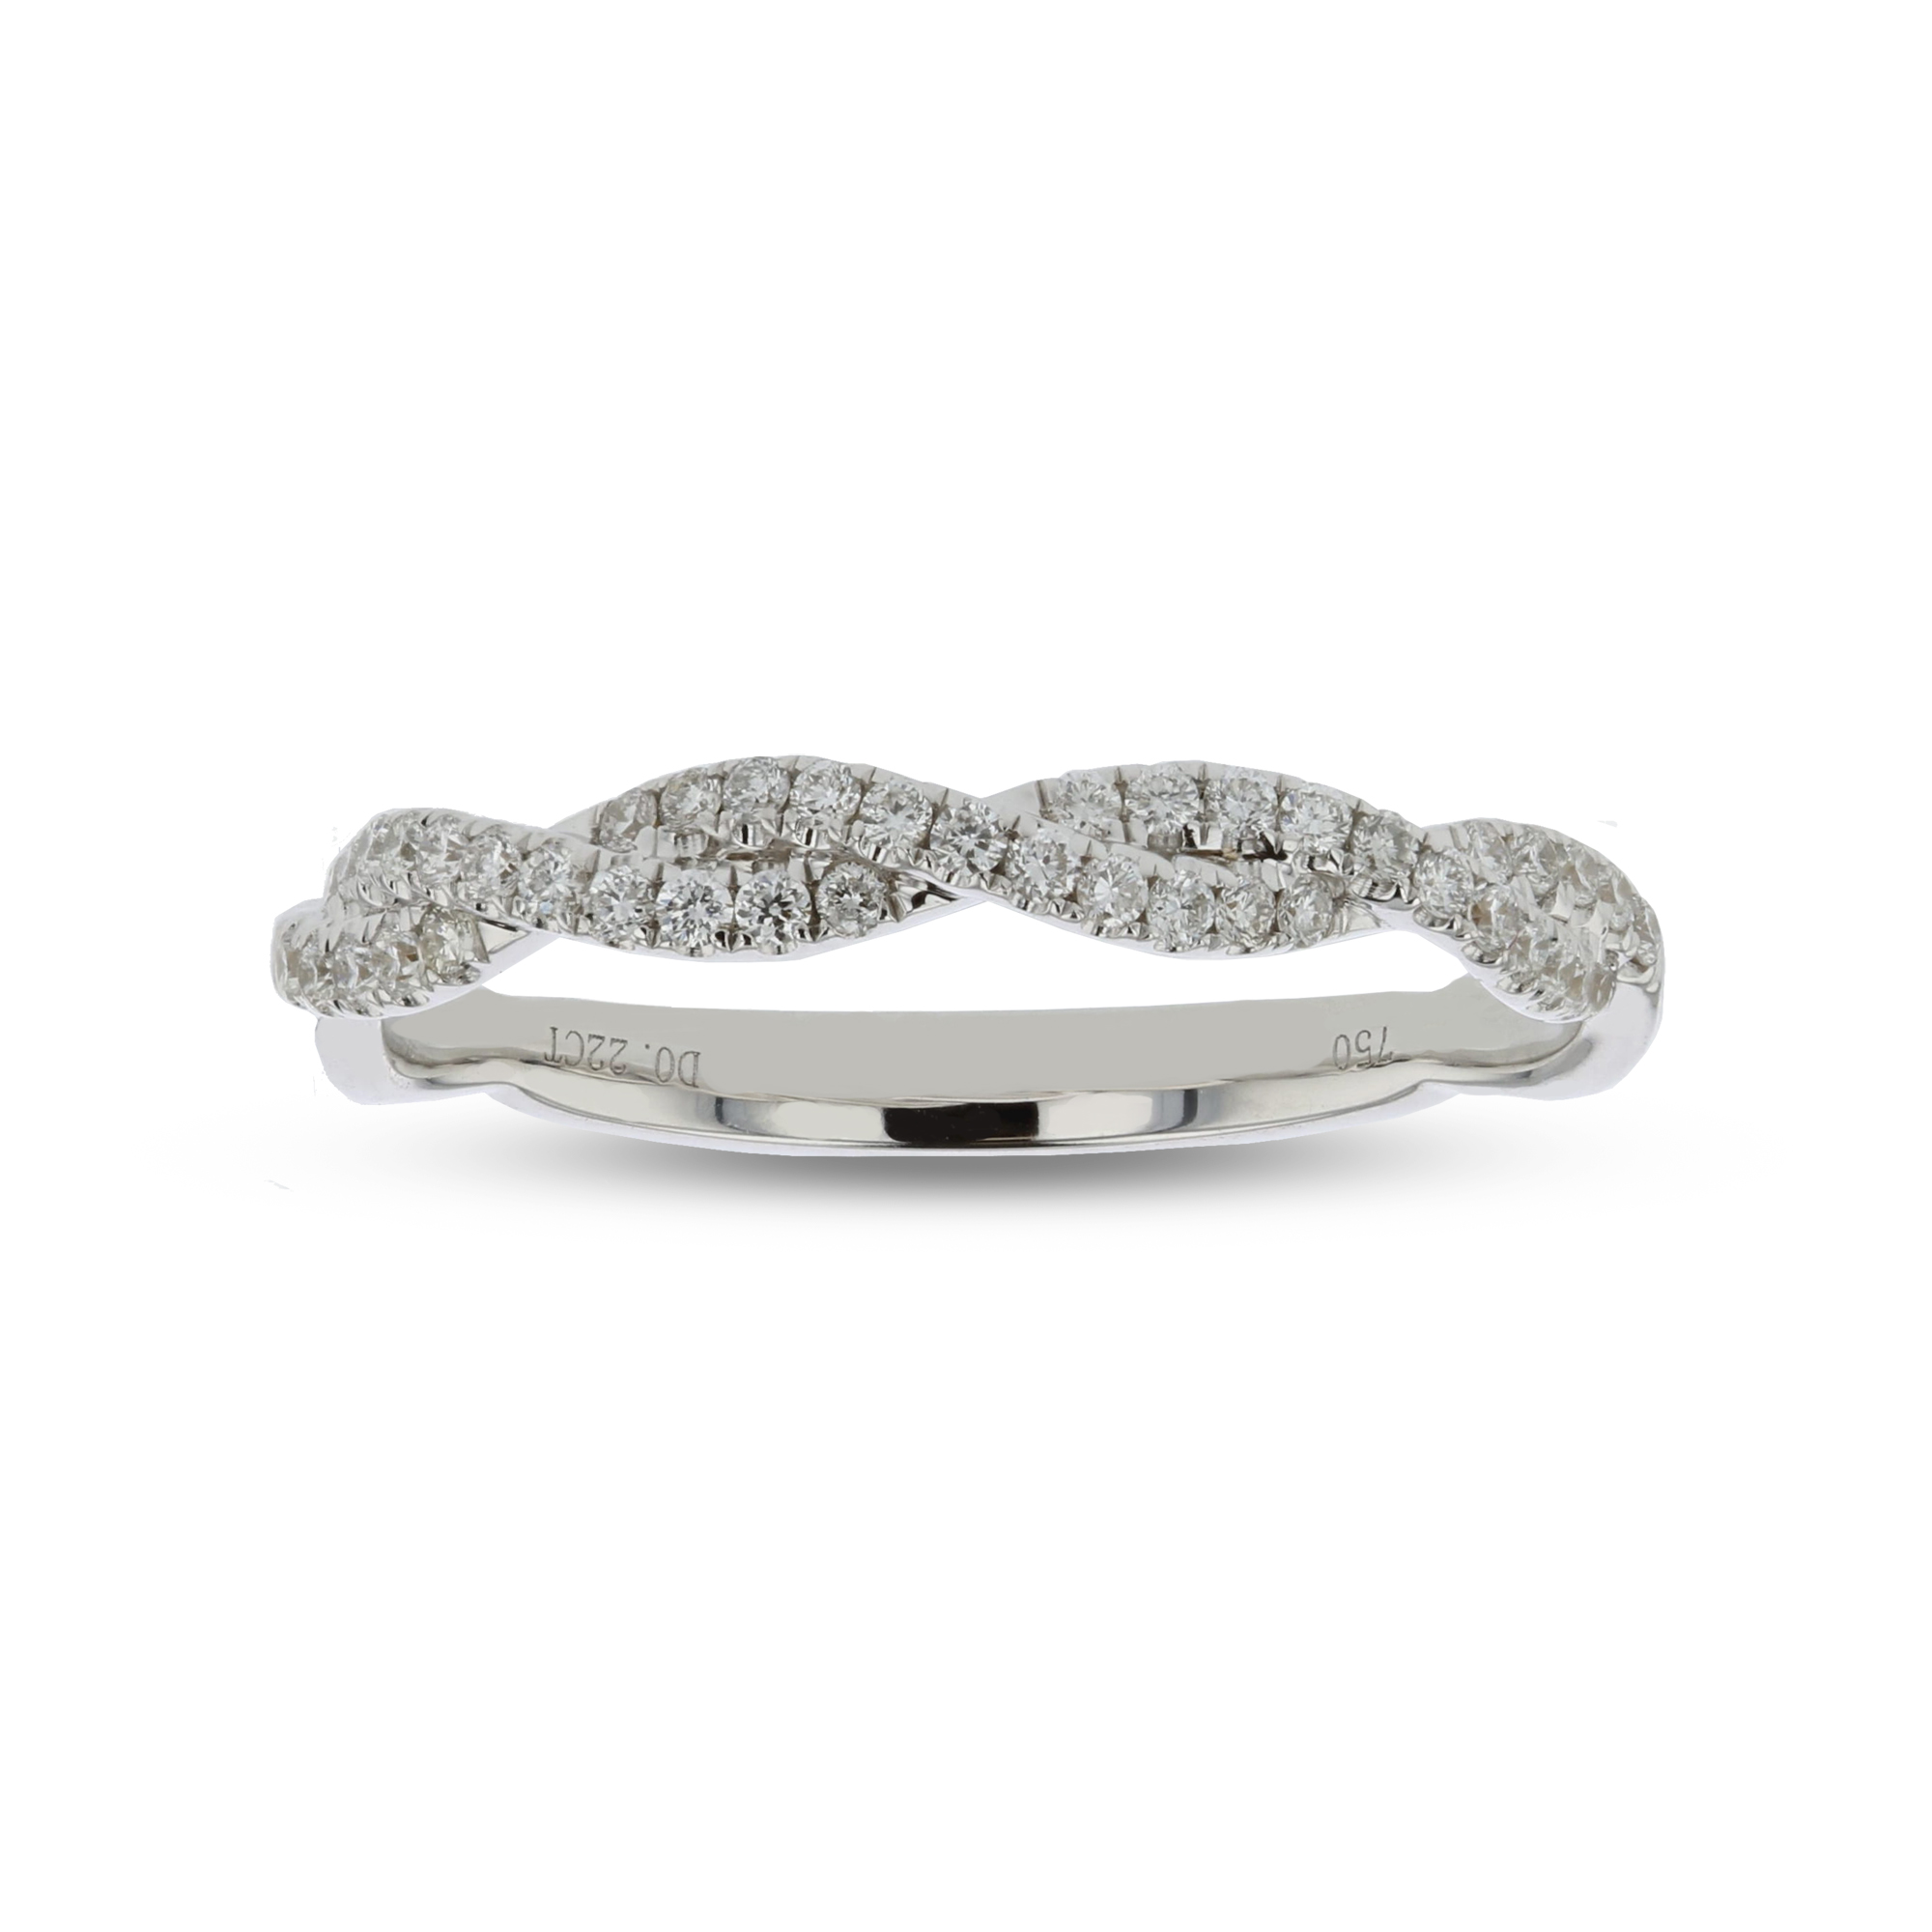 View 0.22ctw Diamond Infinity Band in 18k White Gold